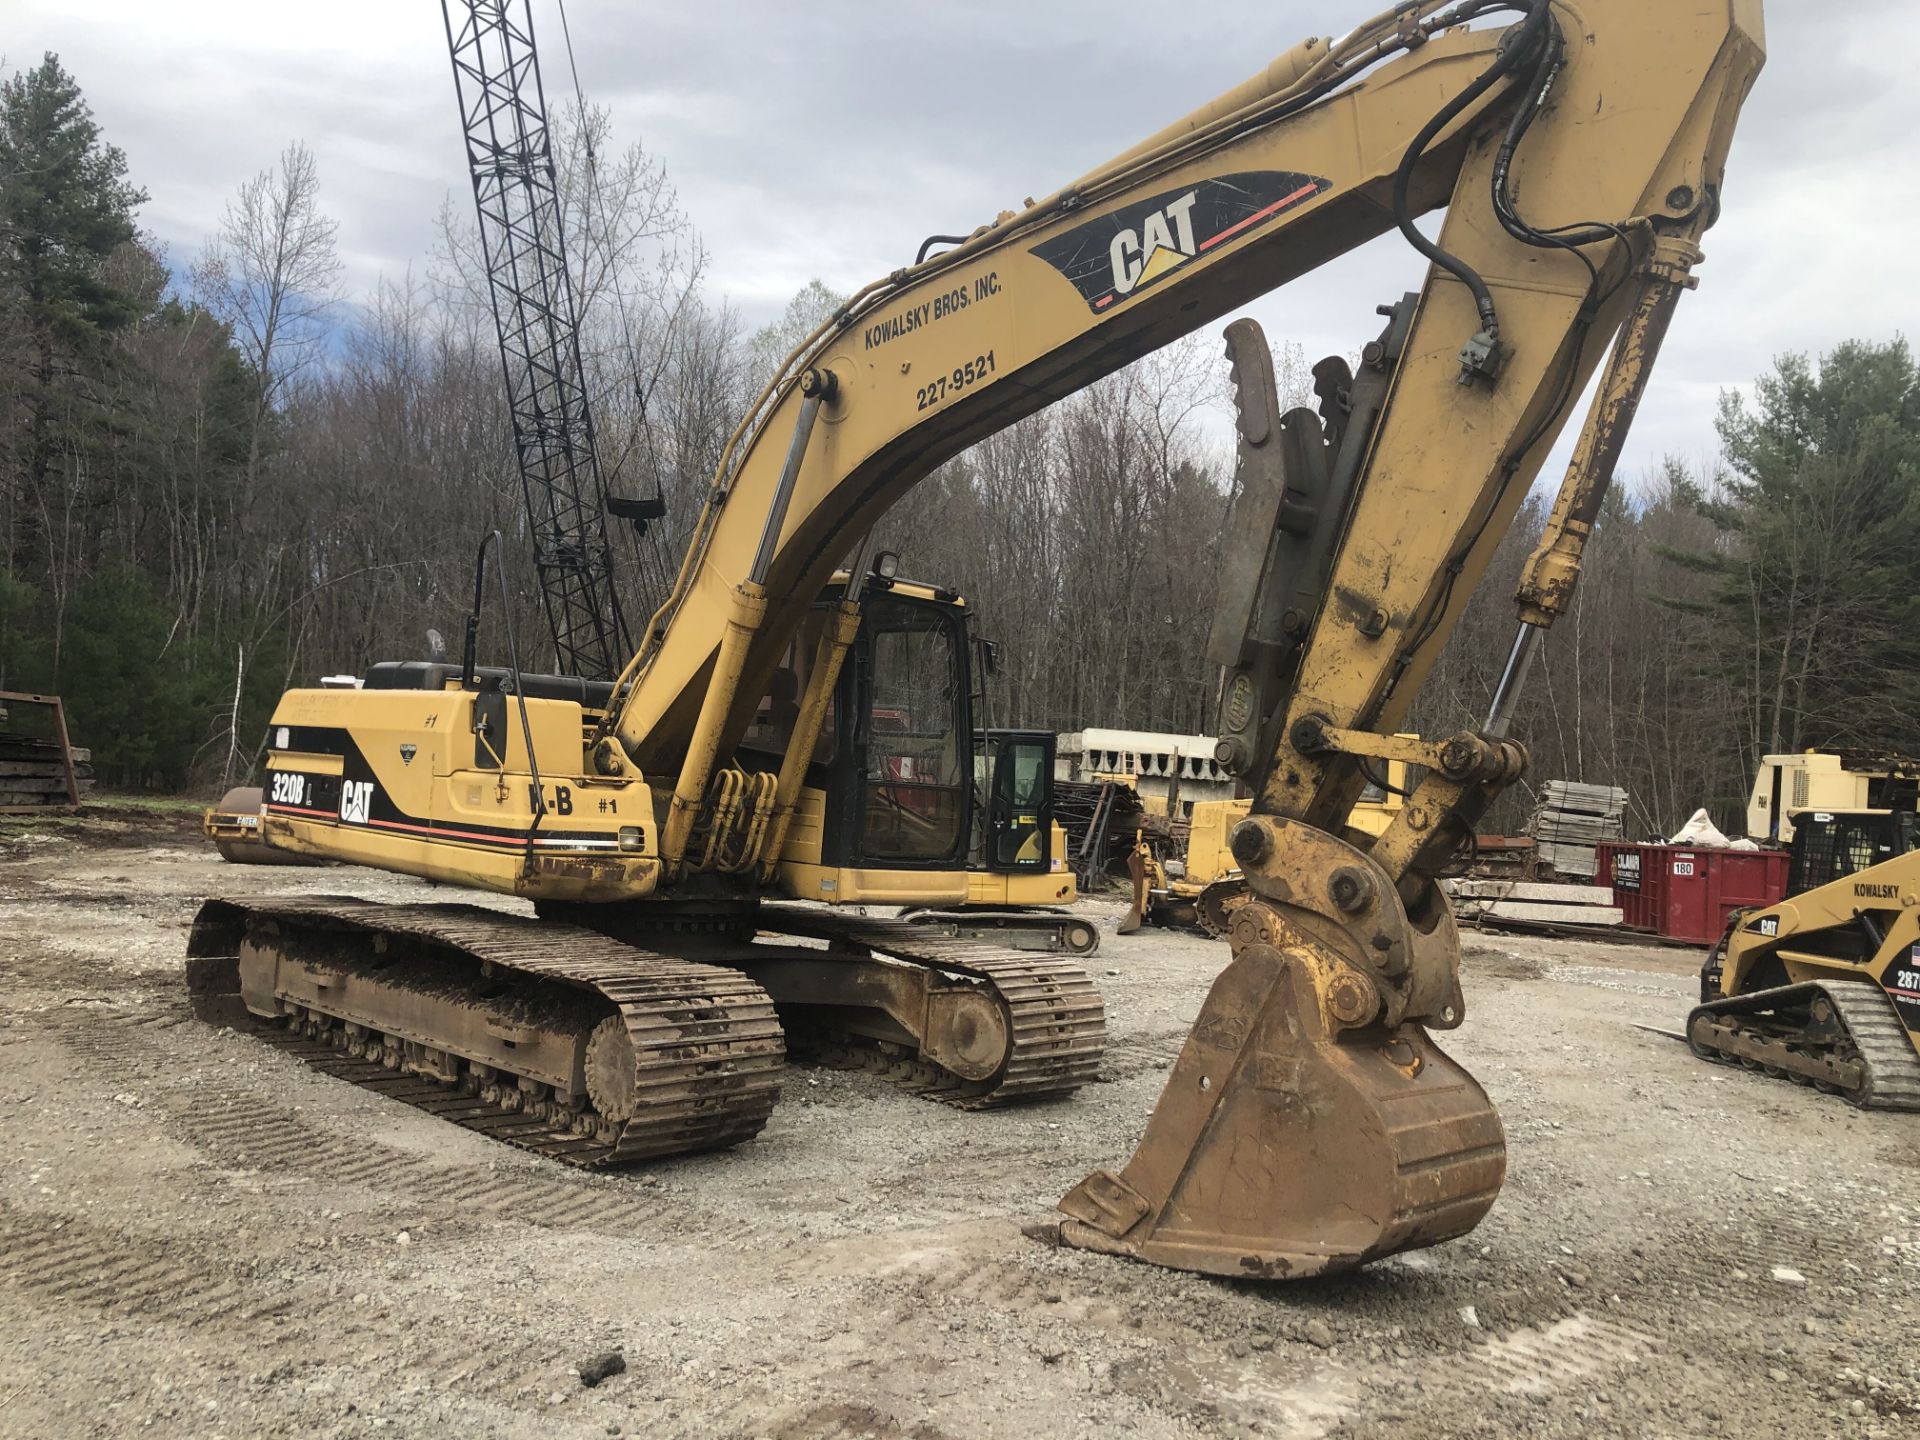 1998 CAT 320-BL track excavator, s/n 6CR02154, 7267 hours, manual thumb, hydraulic quick coupler - Image 12 of 41